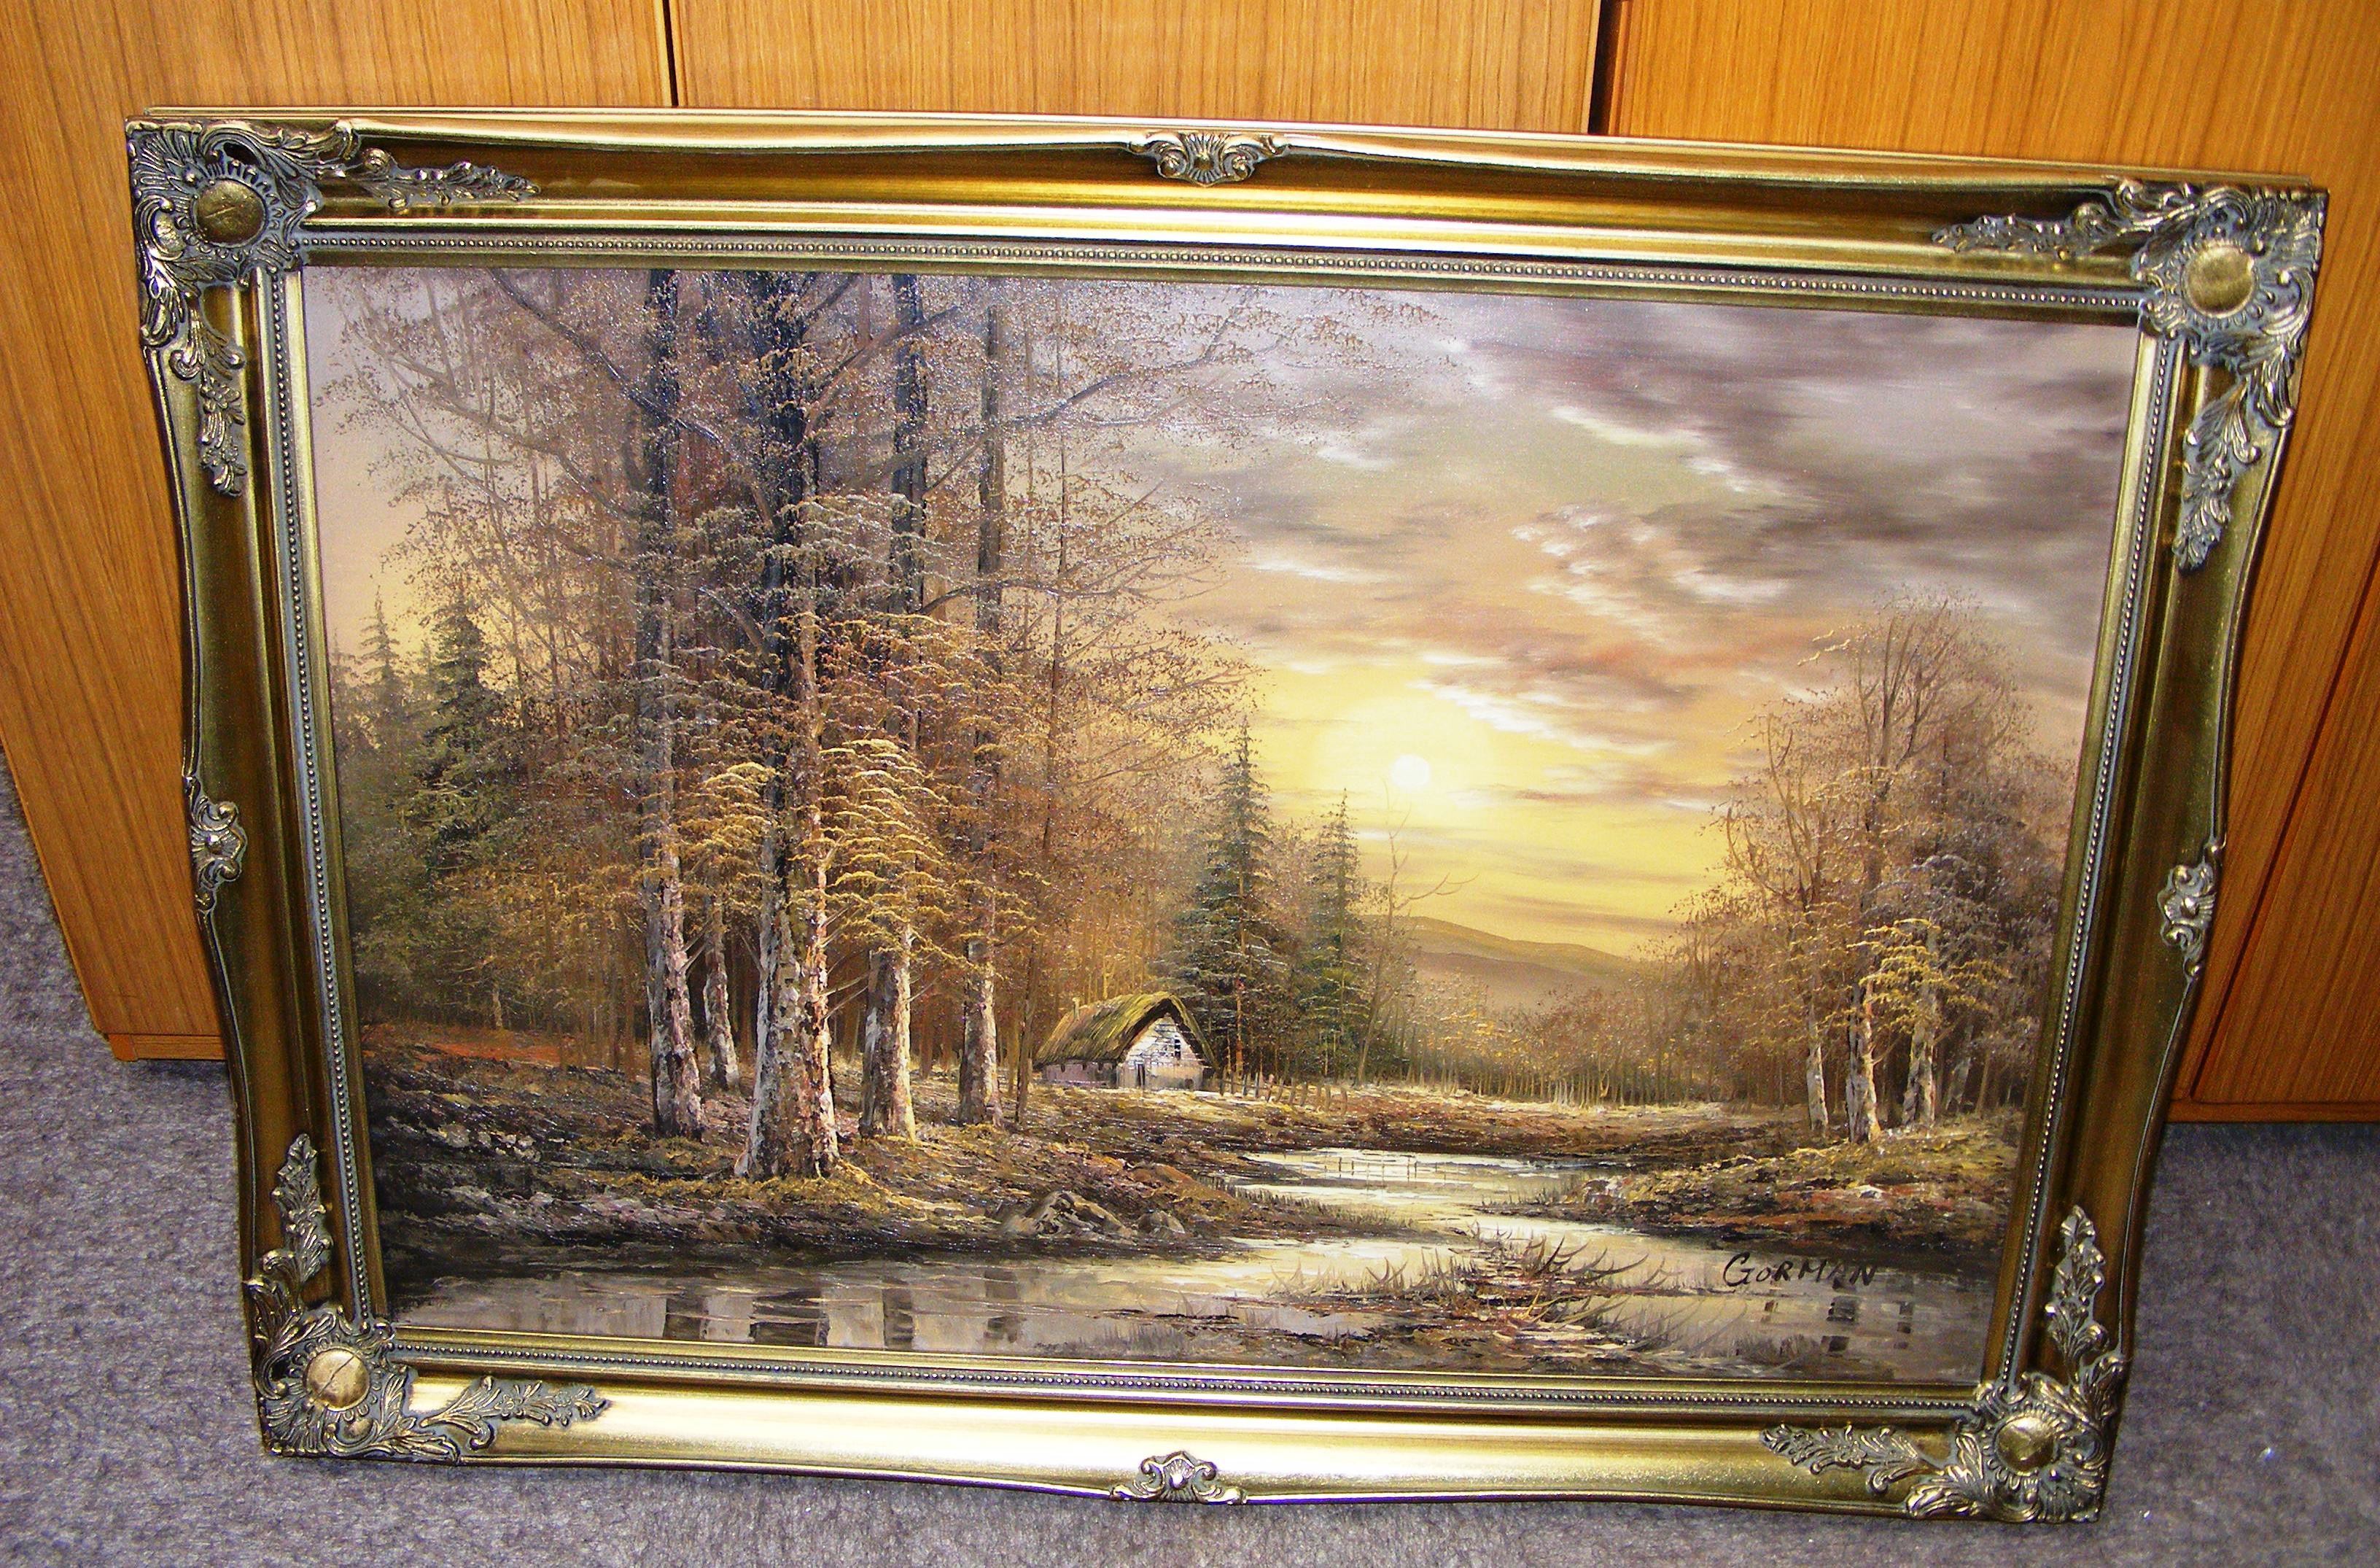 A oil painting signed by the artist "Gorman" to the bottom right. CONDITION REPORT: Note: we do